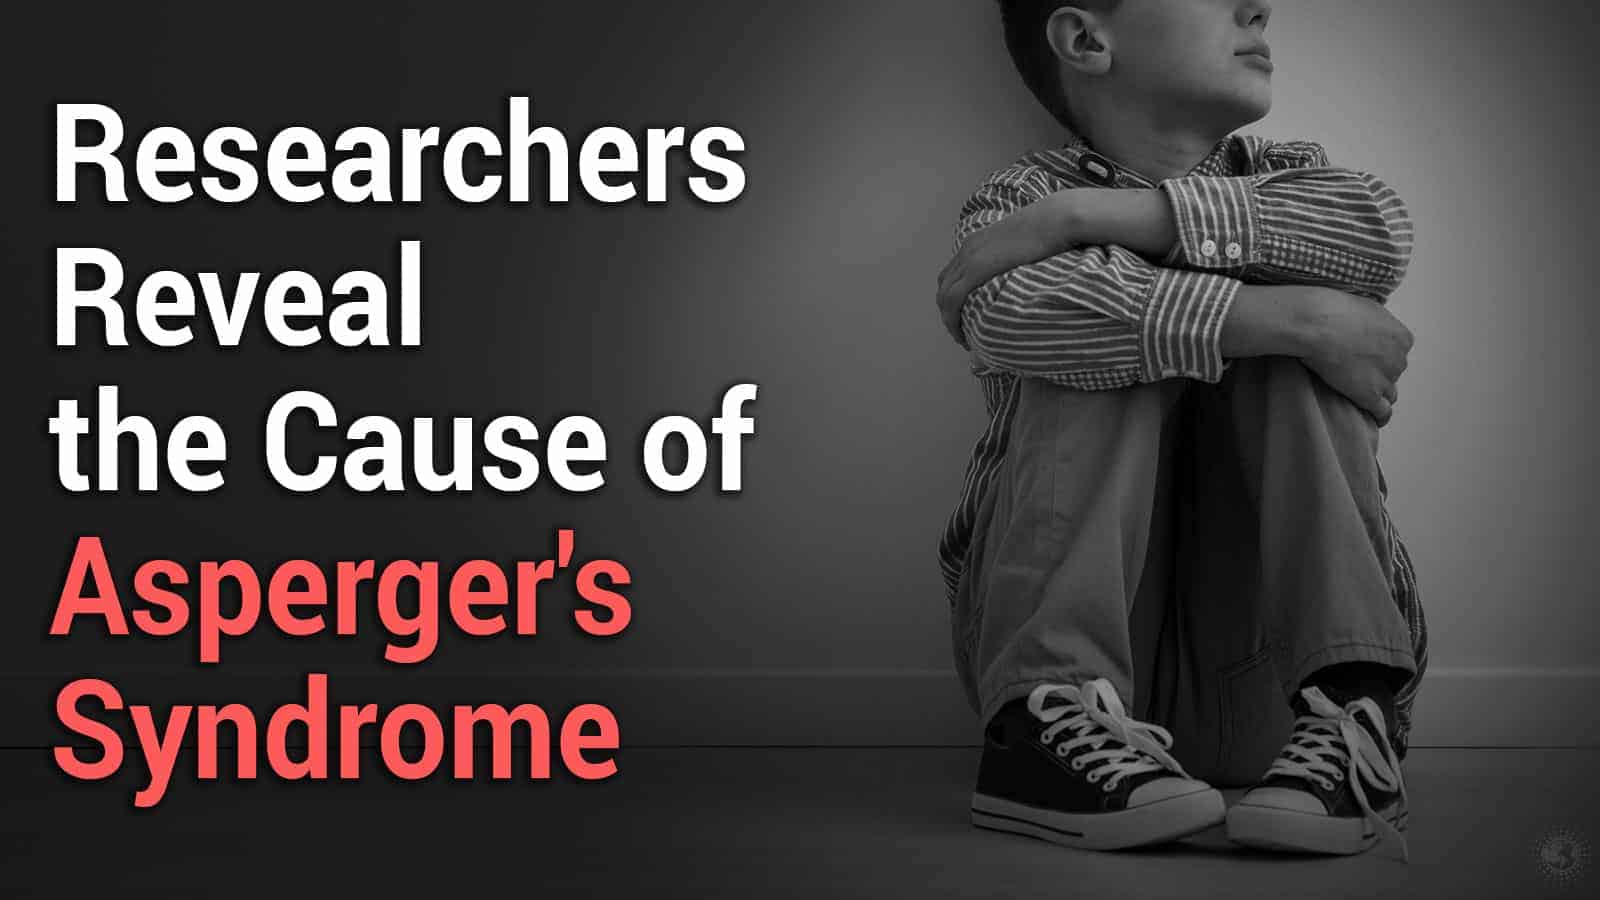 Researchers Reveal Possible Causes of Asperger’s Syndrome